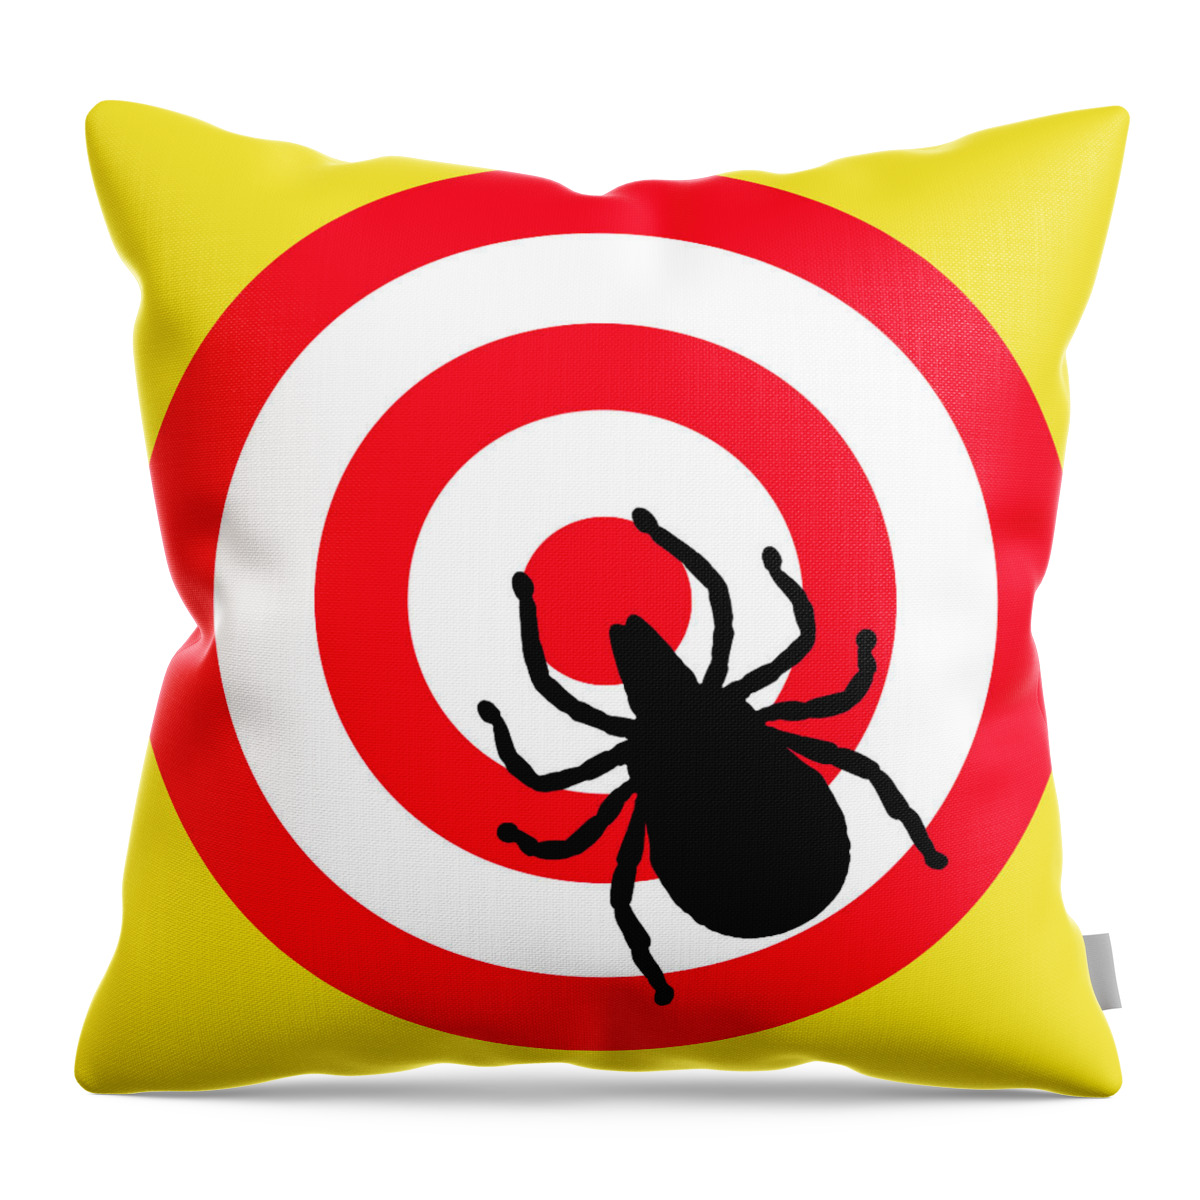 Richard Reeve Throw Pillow featuring the digital art Lyme Disease Ixodes Tick on Target by Richard Reeve